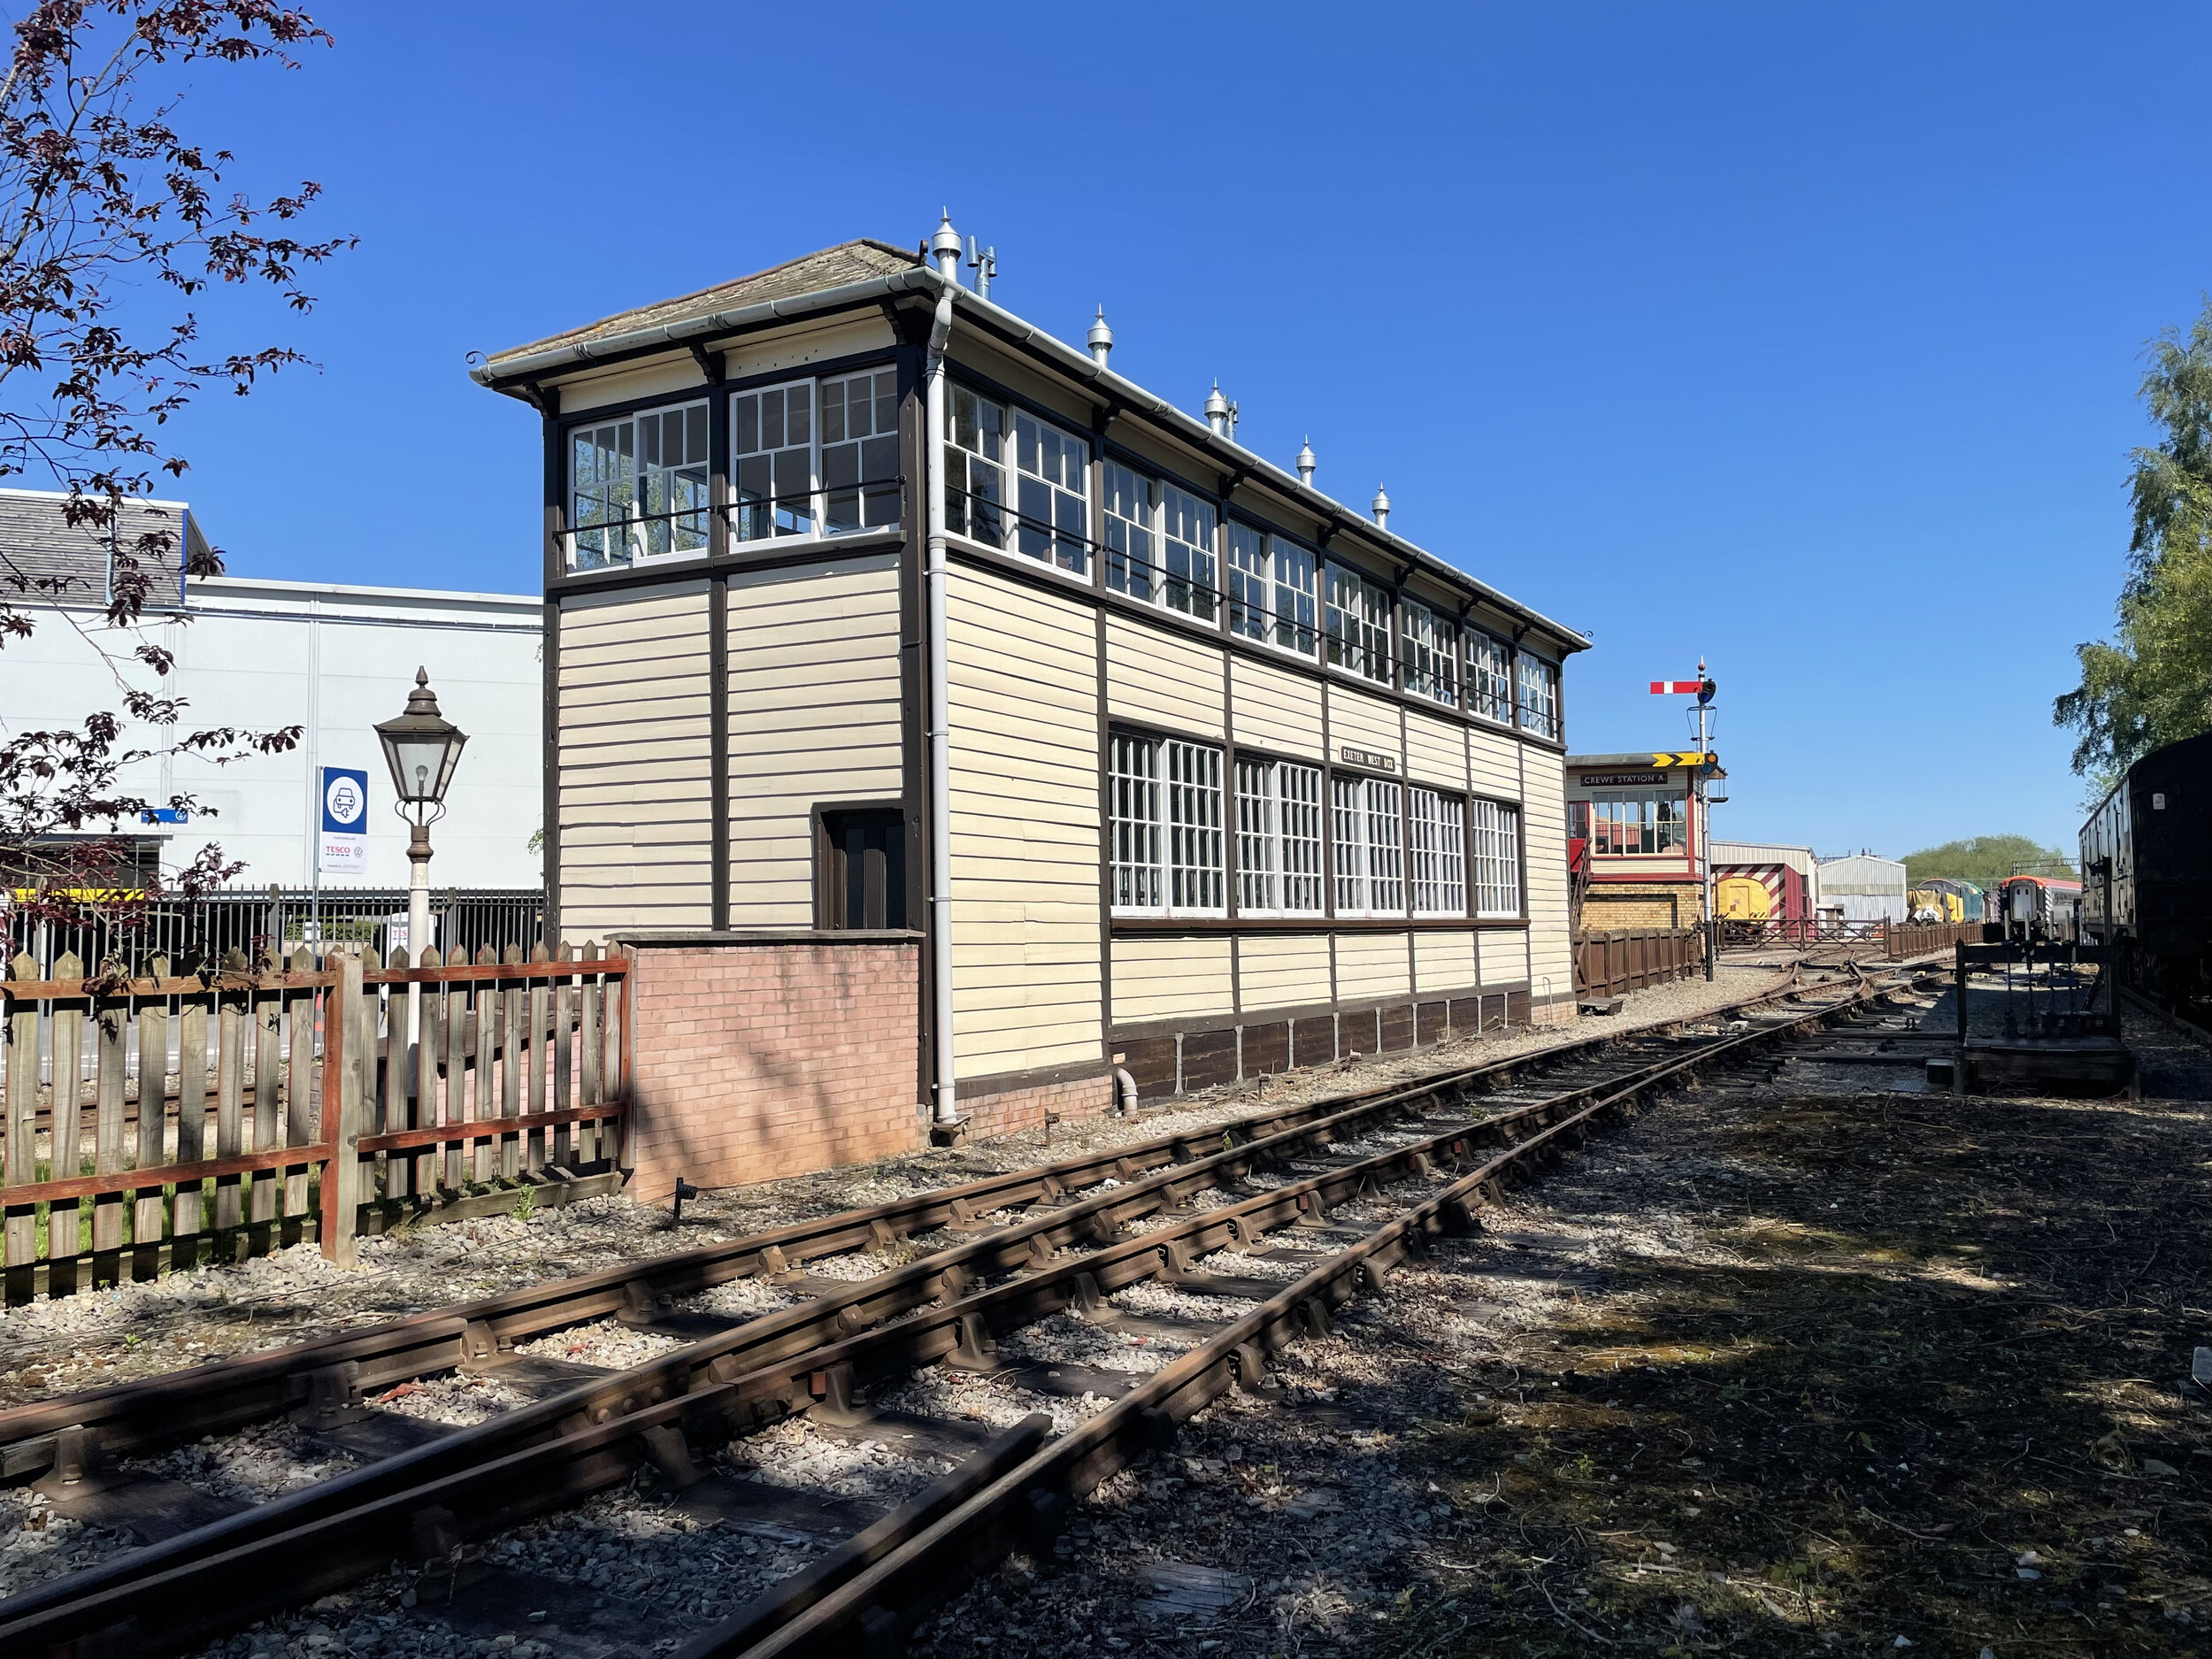 Exeter West Signal Box